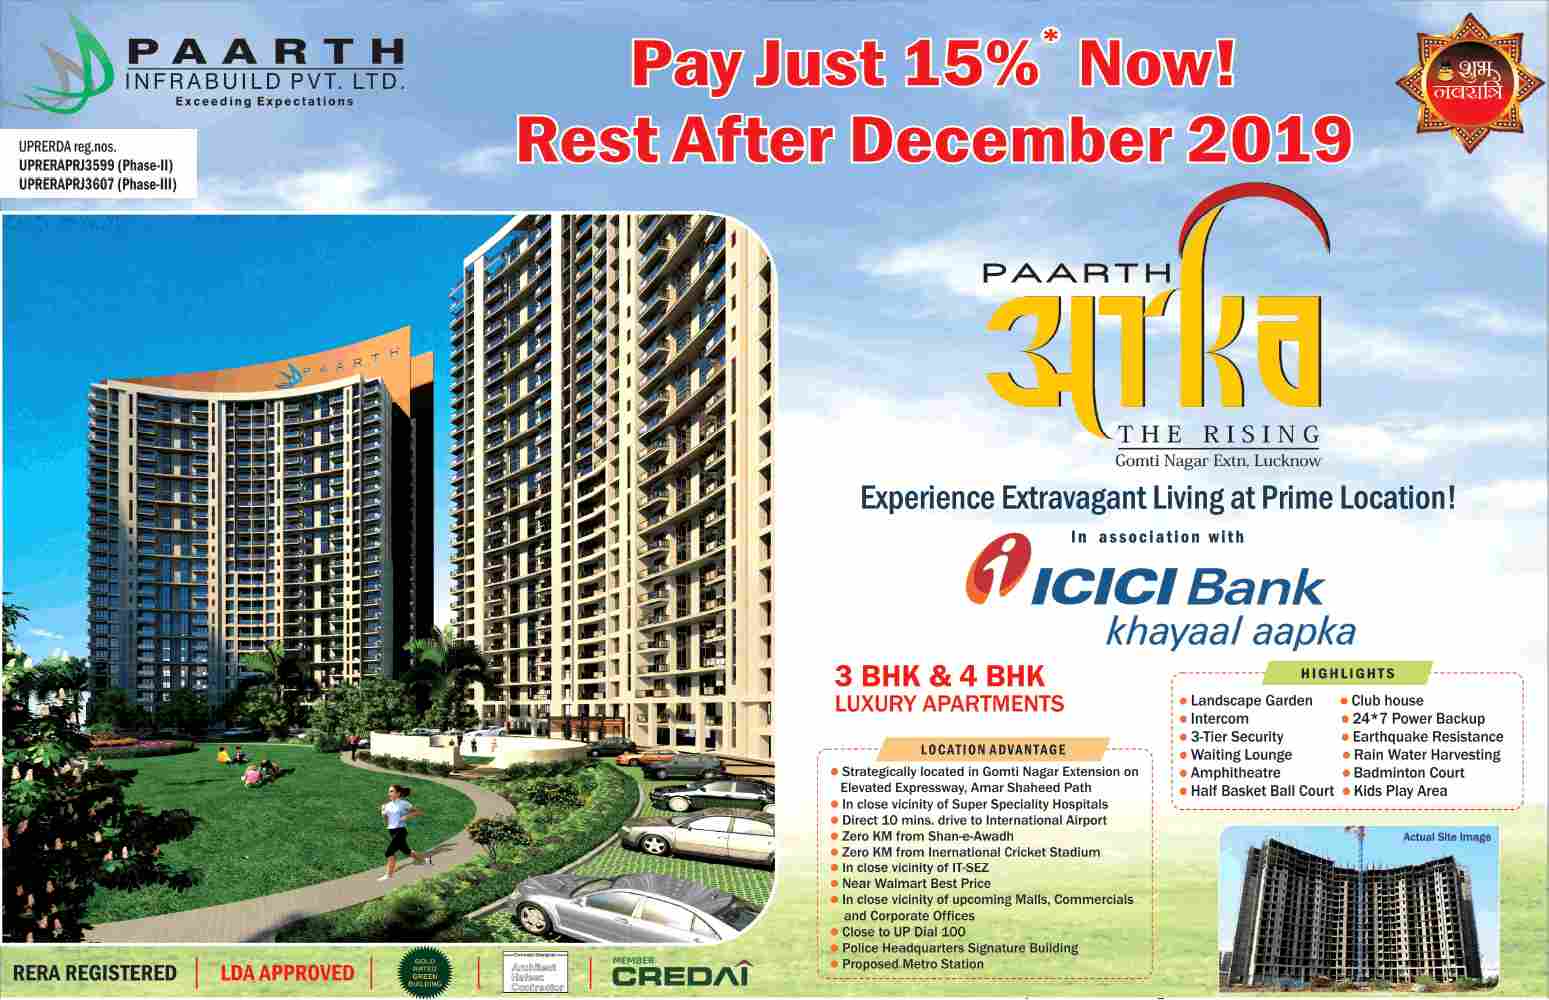 Pay just 15% now and rest after December 2019 at Paarth Arka in Lucknow